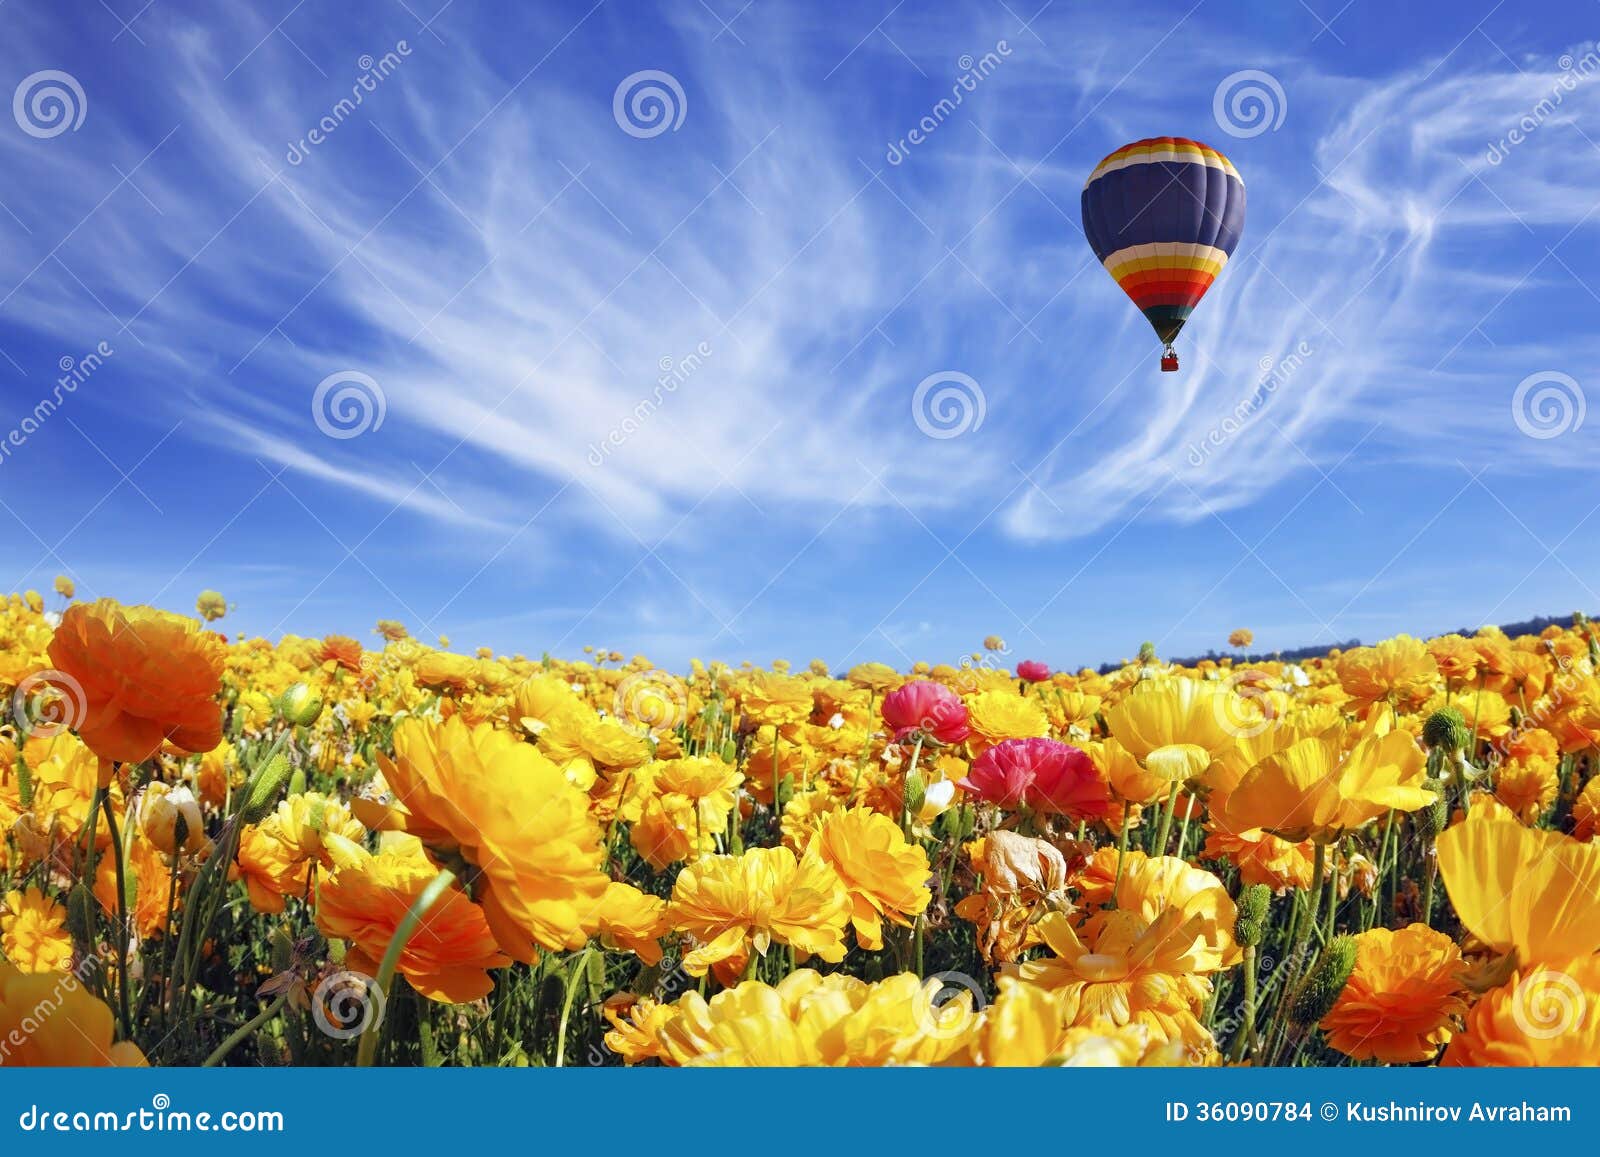 The Huge Field of White and Orange Buttercups Stock Photo - Image of ...